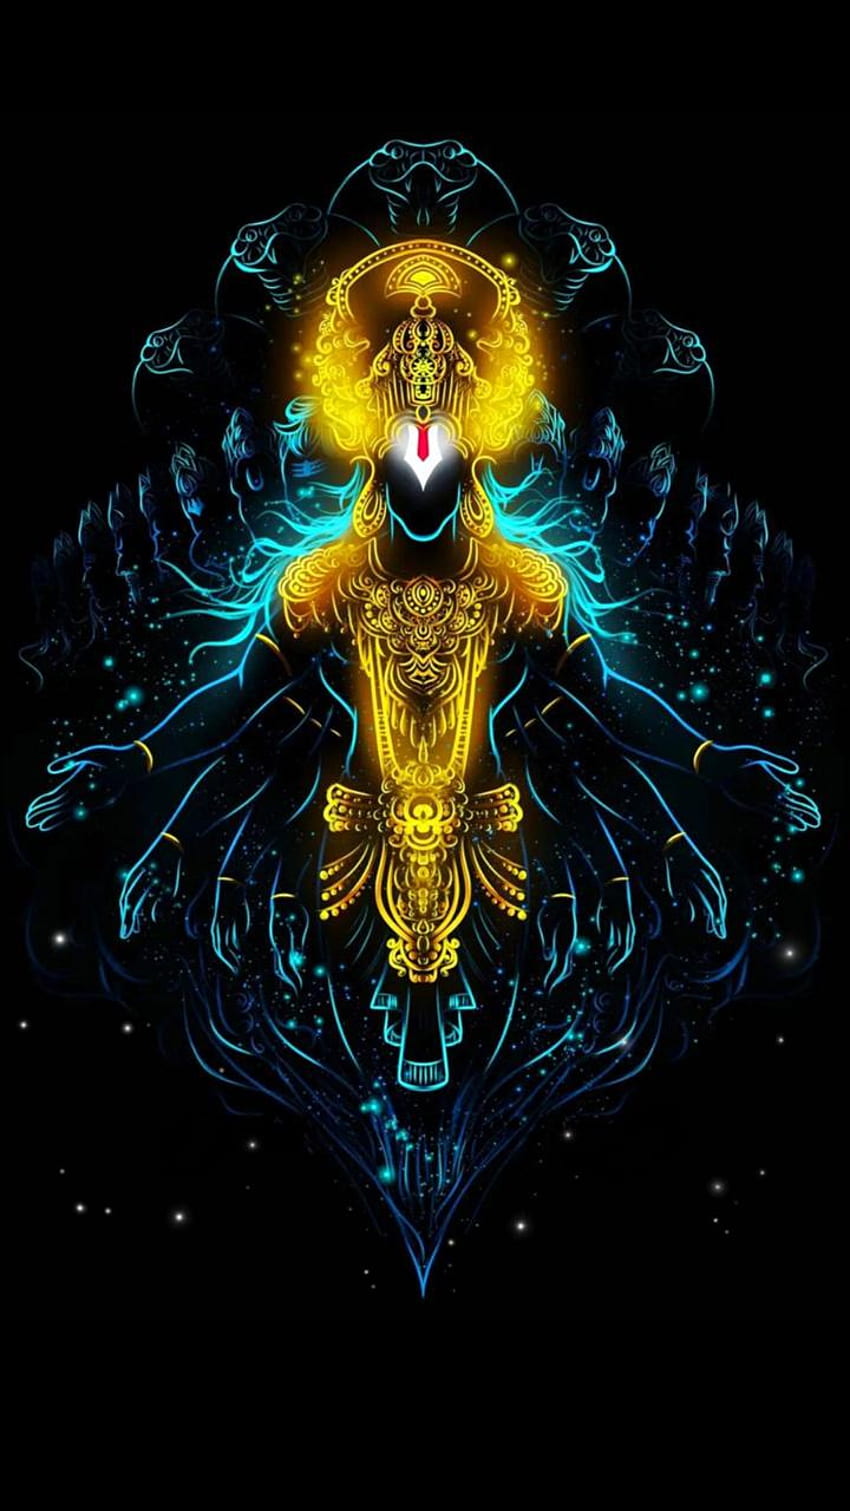 Hindu God Wallpapers For Mobile Phones, God Hd Wallpaper Download Free (1)  Total PNG | Free Stock Photos